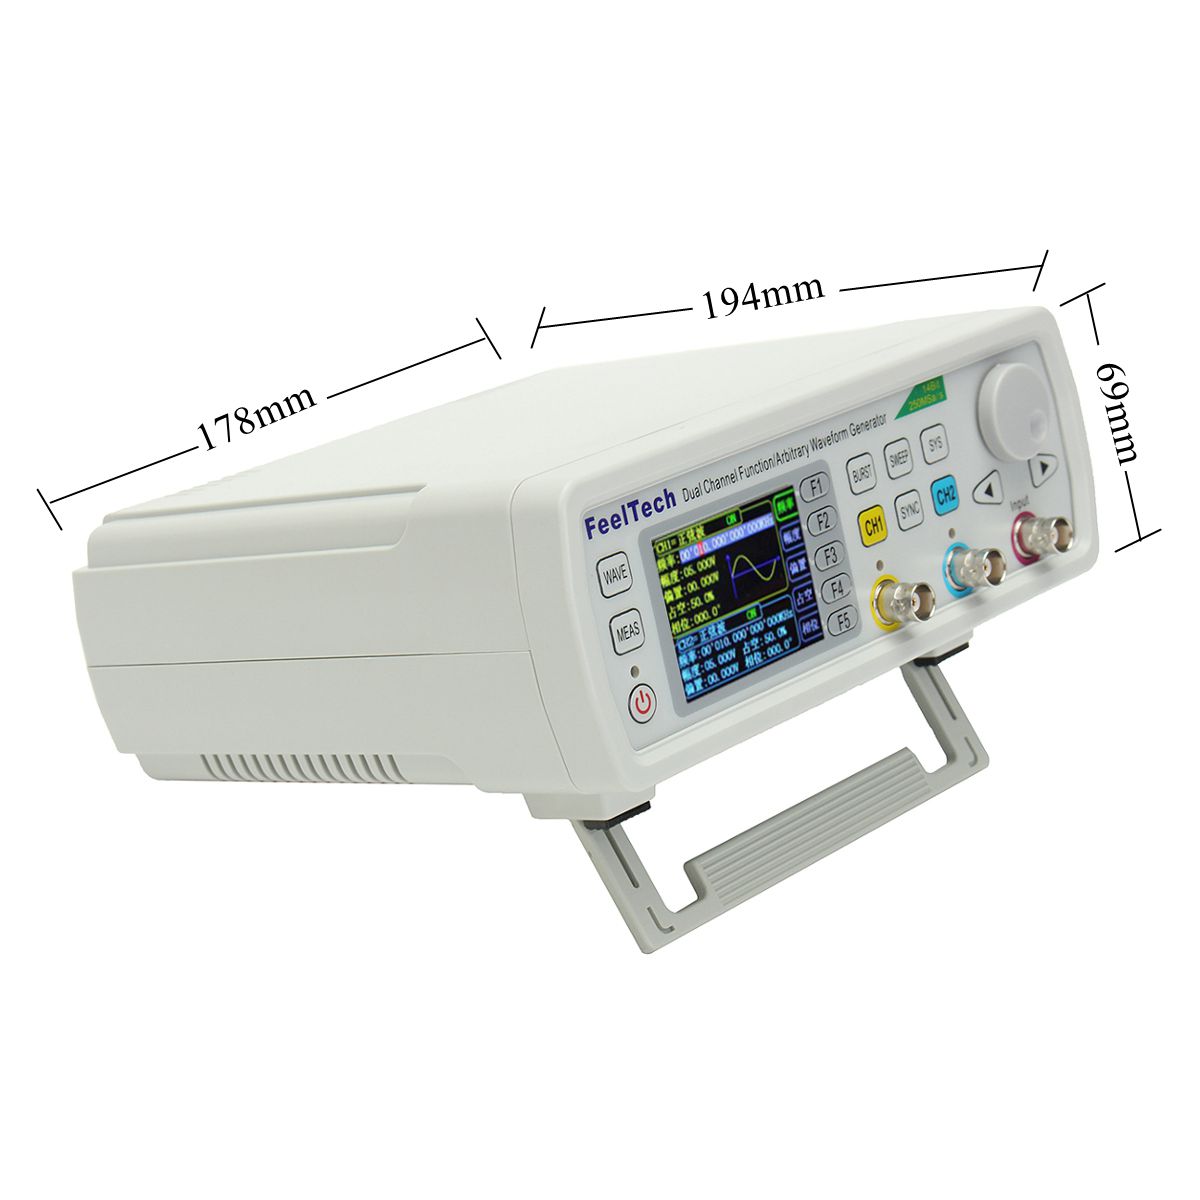 FY6600 Digital 12-60MHz Dual Channel DDS Function Arbitrary Waveform Signal Generator Frequency Meter 18